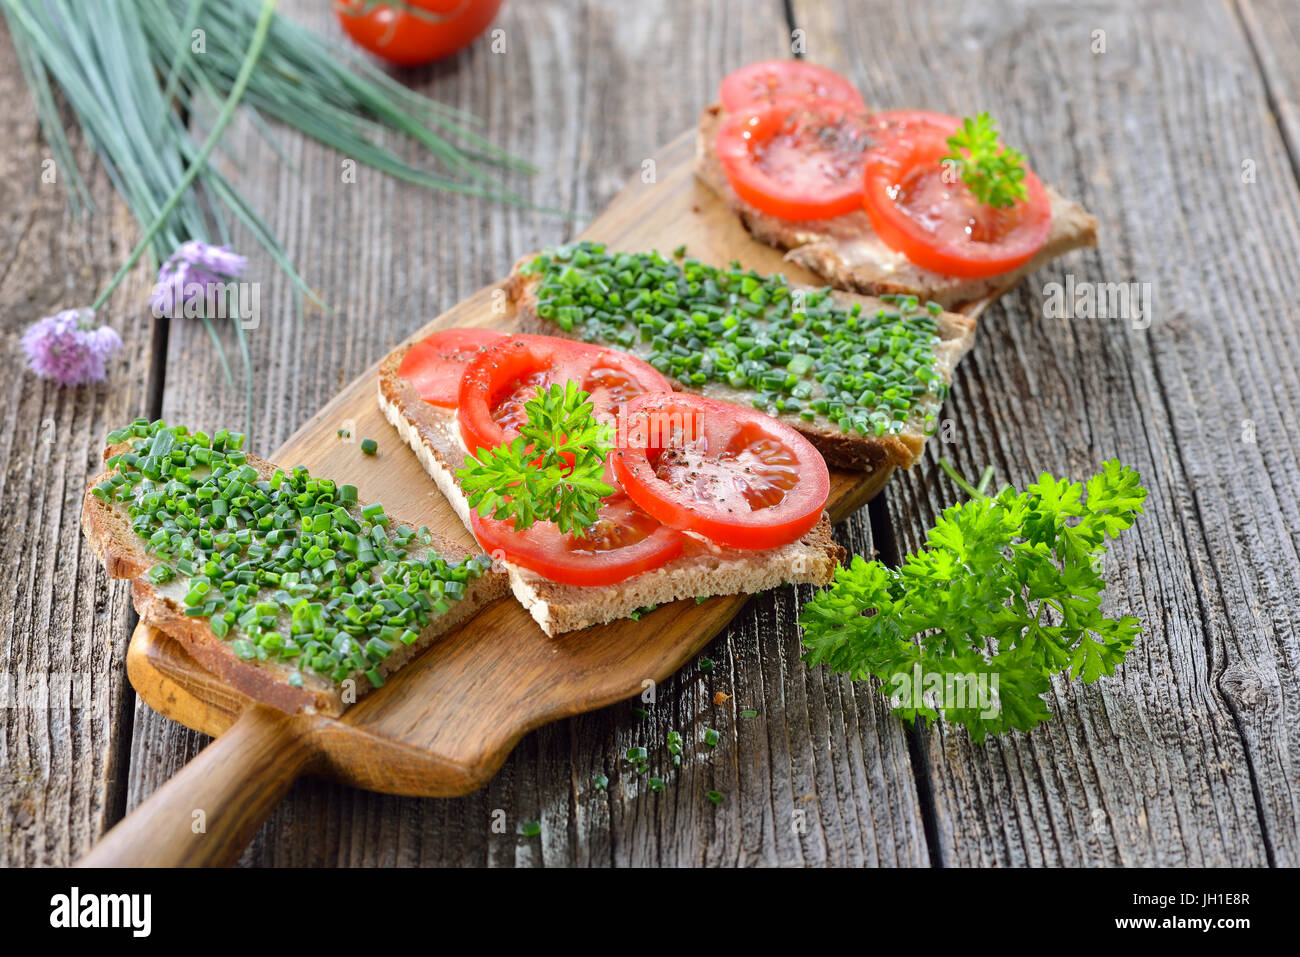 Vegetarian snack: Slices of buttered farmhouse bread with fresh chives and tomatoes on a wooden board Stock Photo